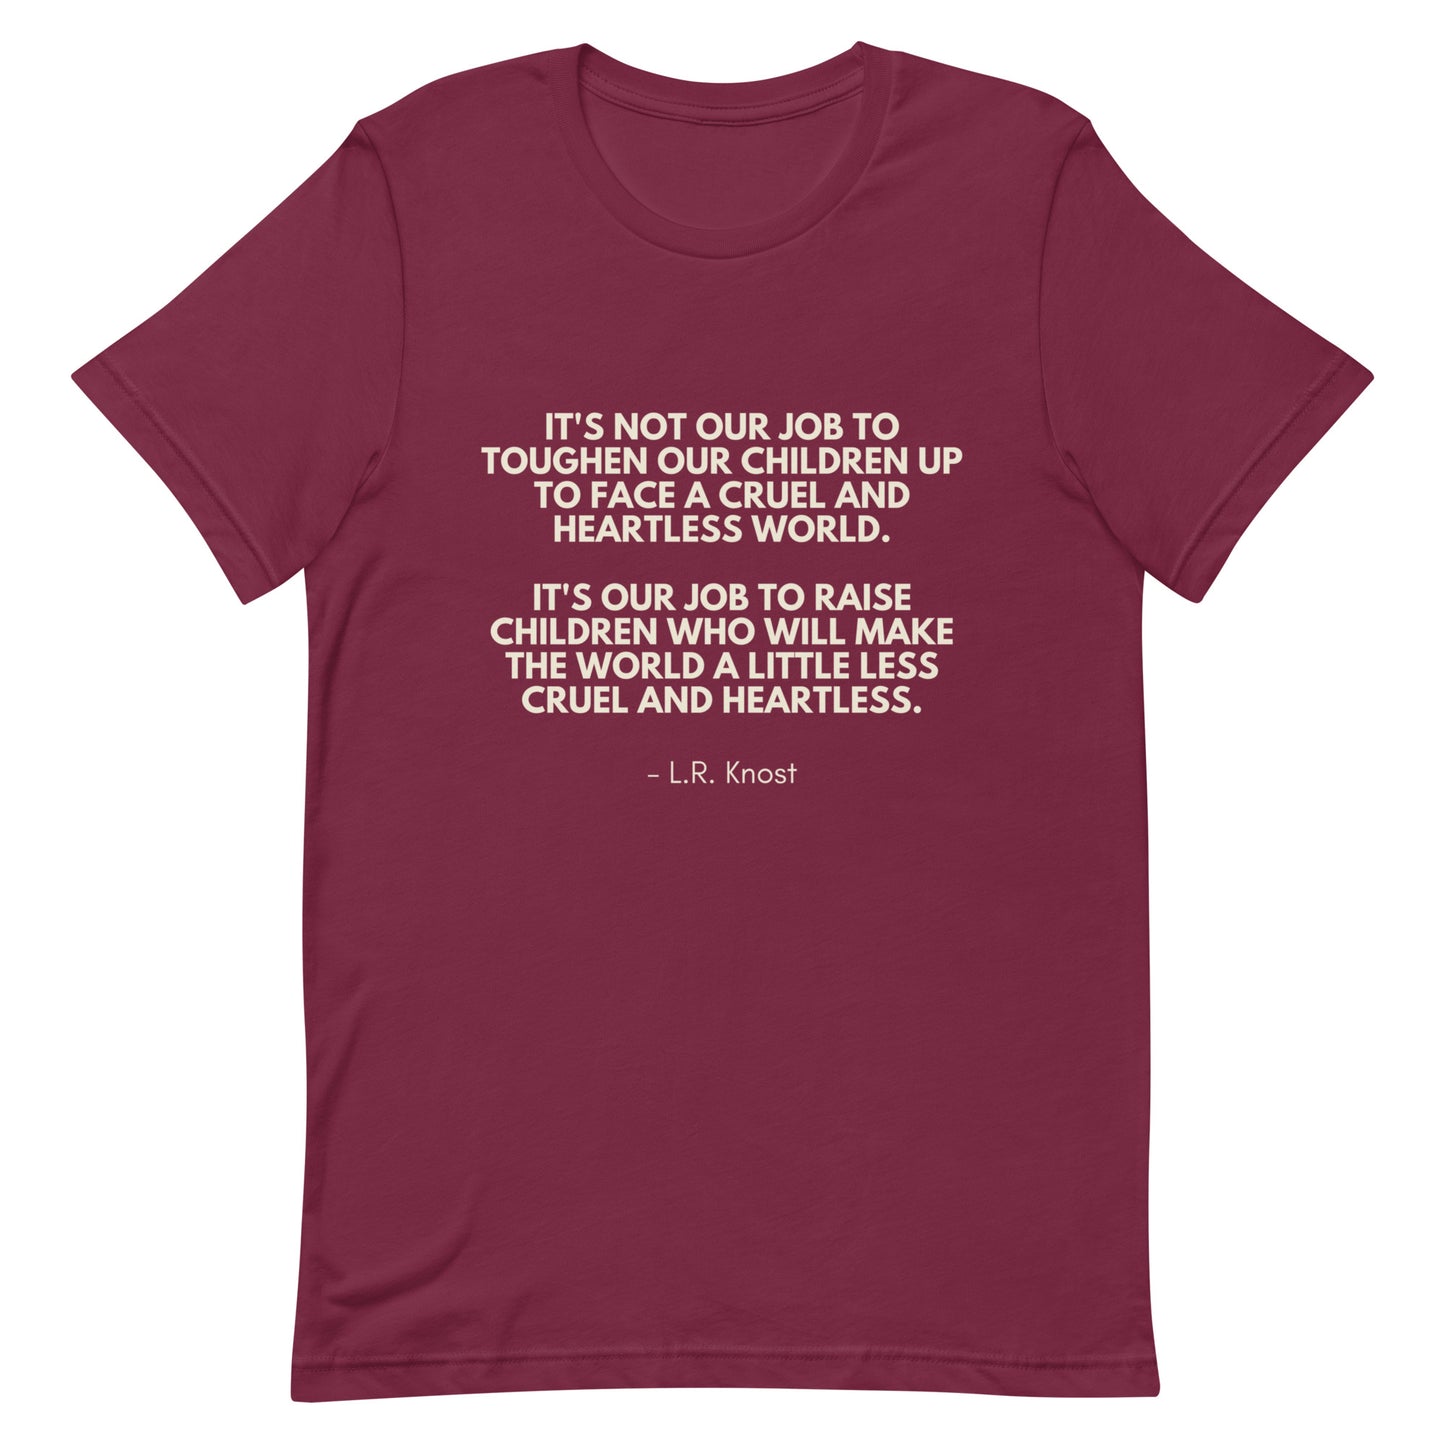 It is not our job to toughen our kids up - L.R. Knost Tee